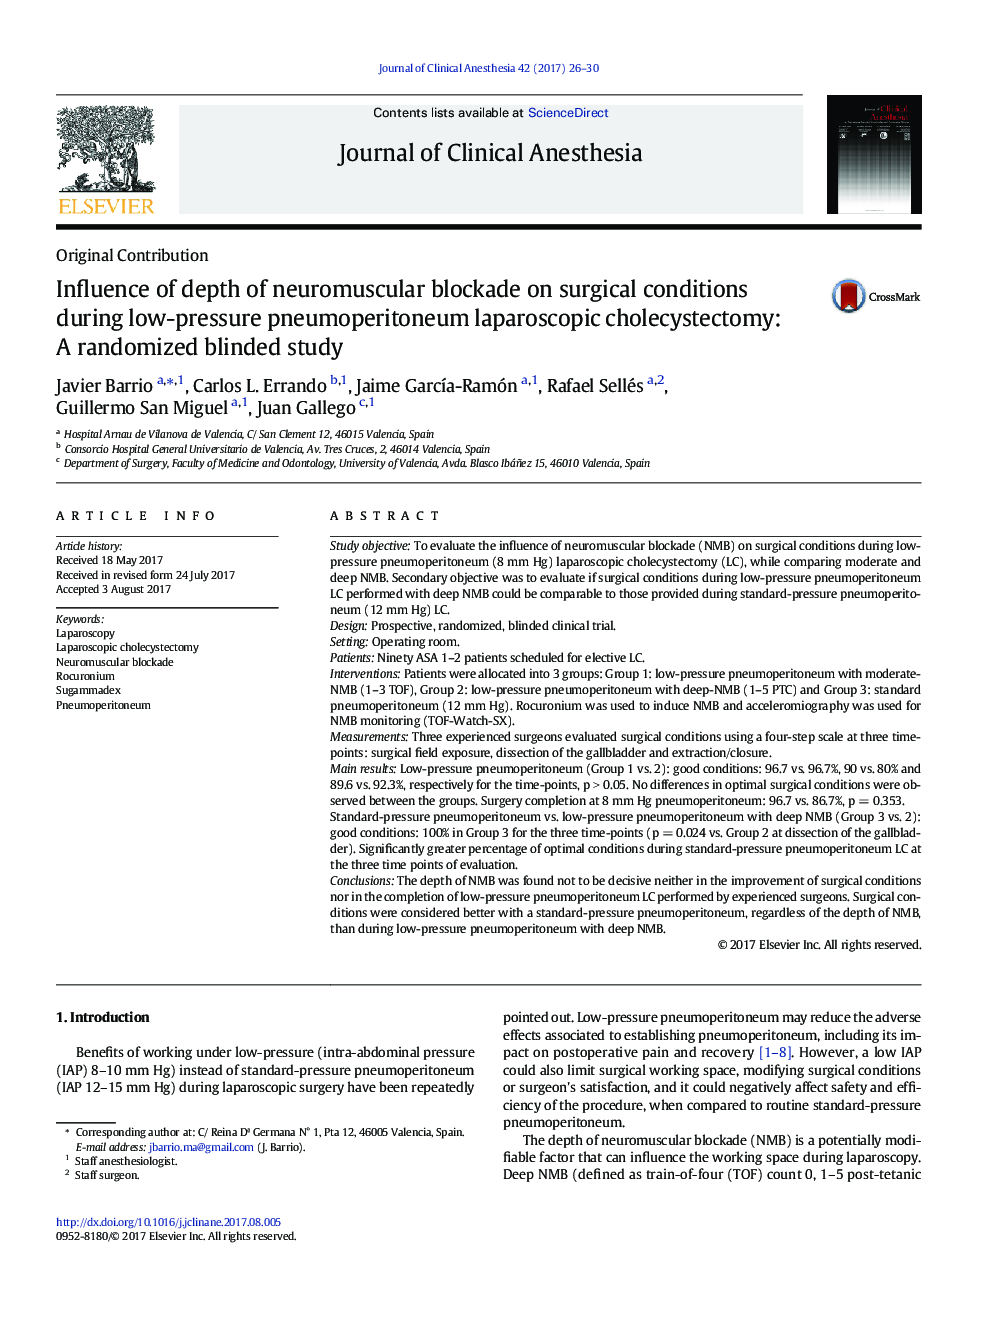 Influence of depth of neuromuscular blockade on surgical conditions during low-pressure pneumoperitoneum laparoscopic cholecystectomy: A randomized blinded study